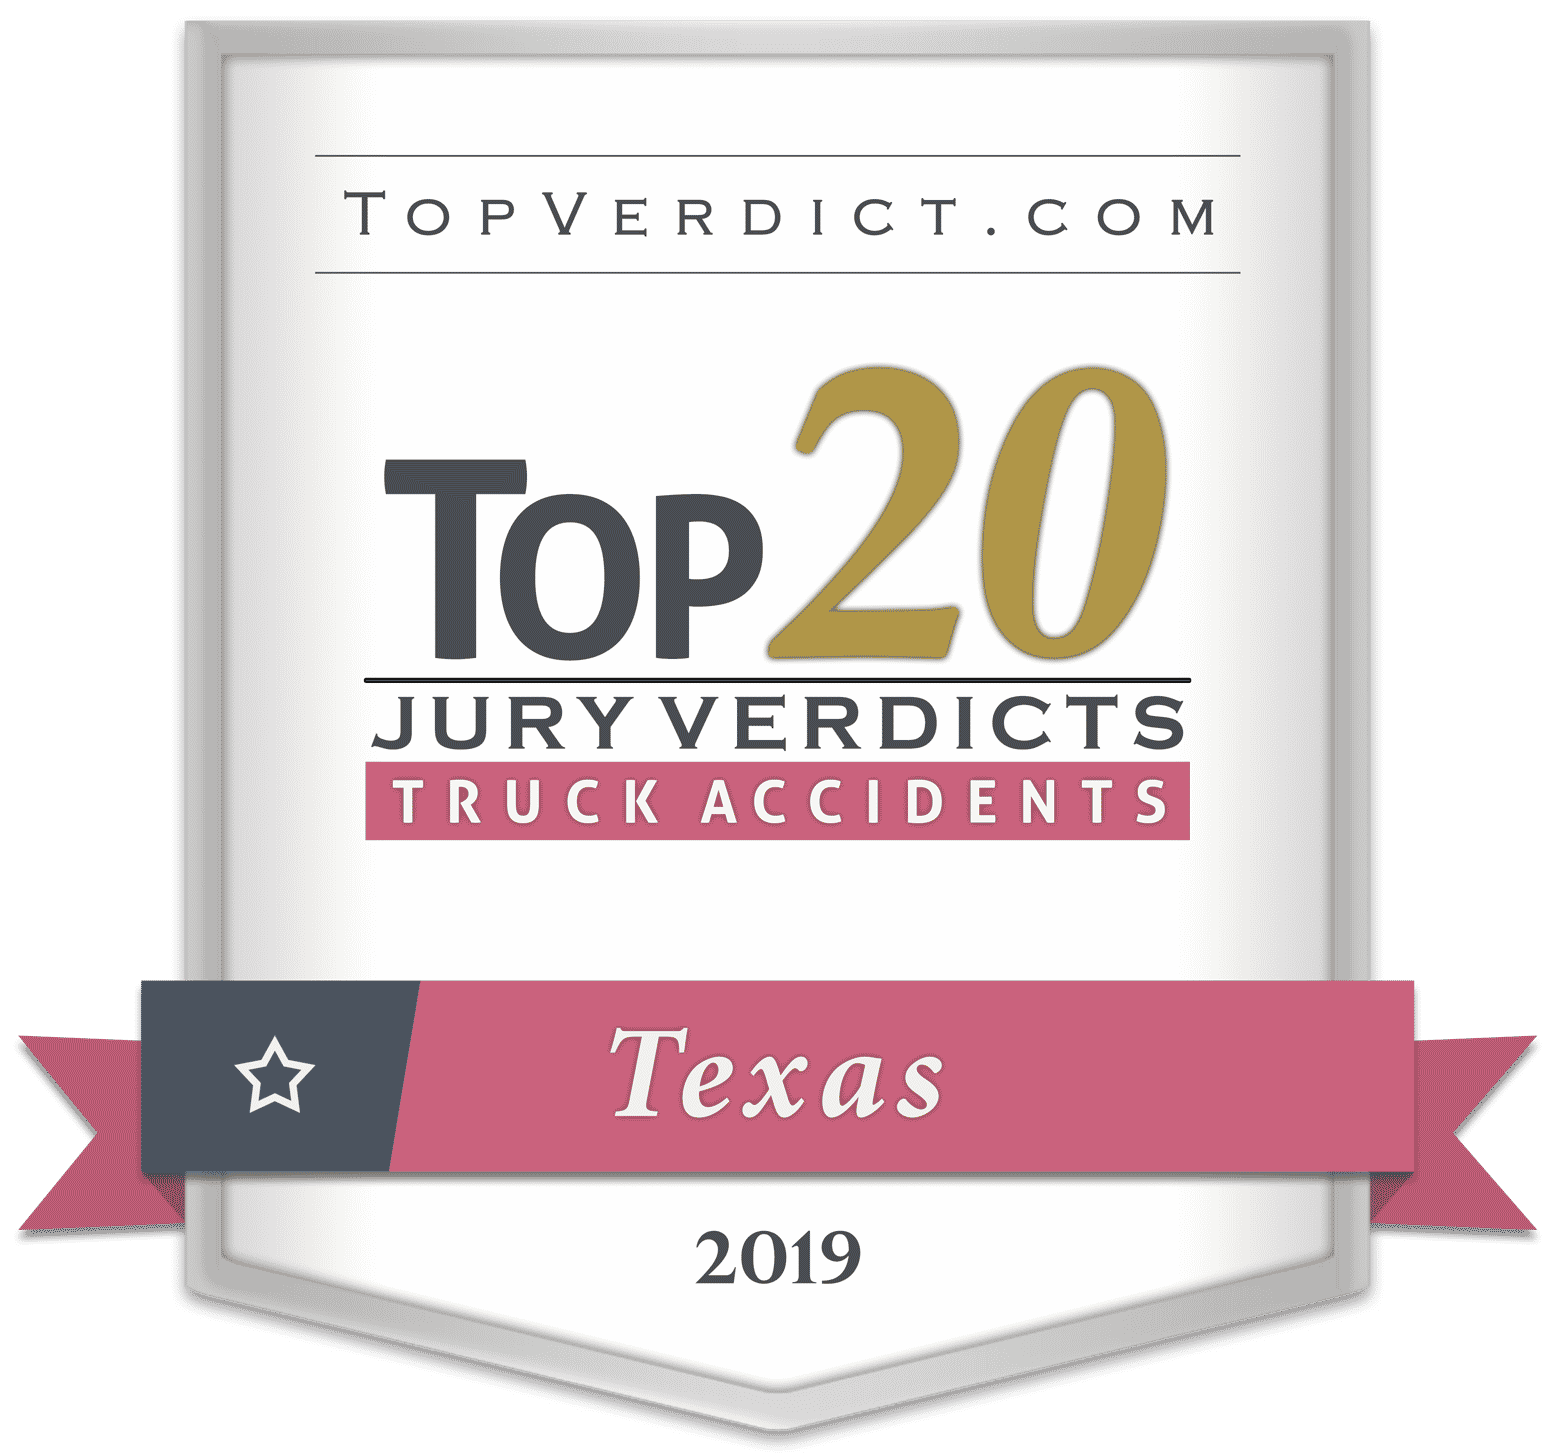 Top20 Jury Verdicts for Truck Accidents in Texas in 2019